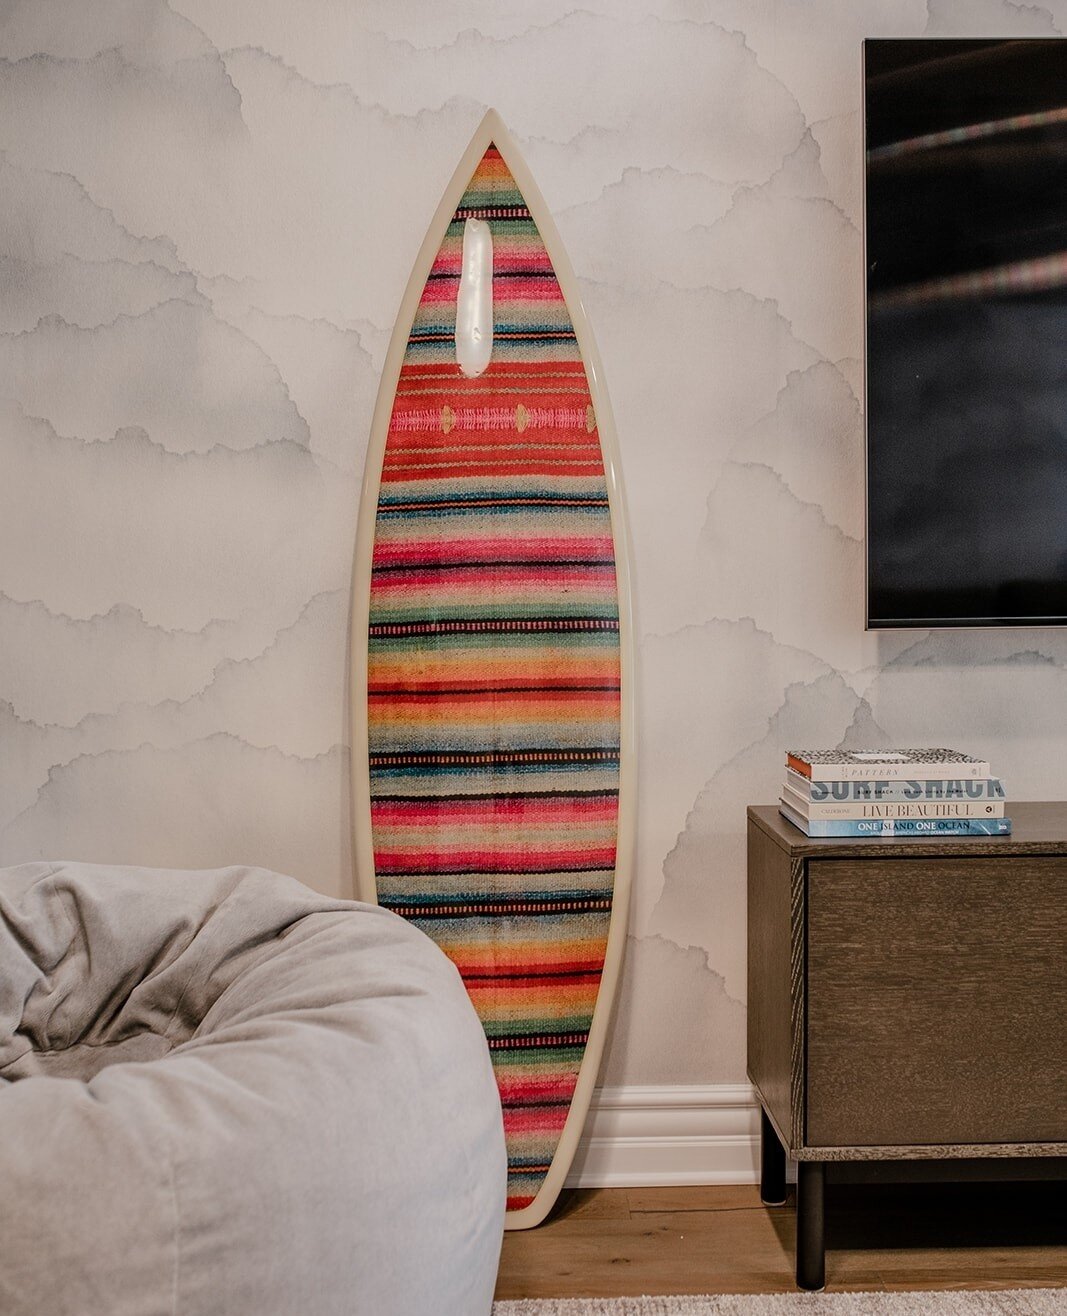 Summer is endless in California. Our long time clients at the &quot;California Oasis&quot; home are art lovers, just like us. The surfboards in this bonus room are shaped by the legendary Gary Linden.⁠
⁠
📸: @marylizomel